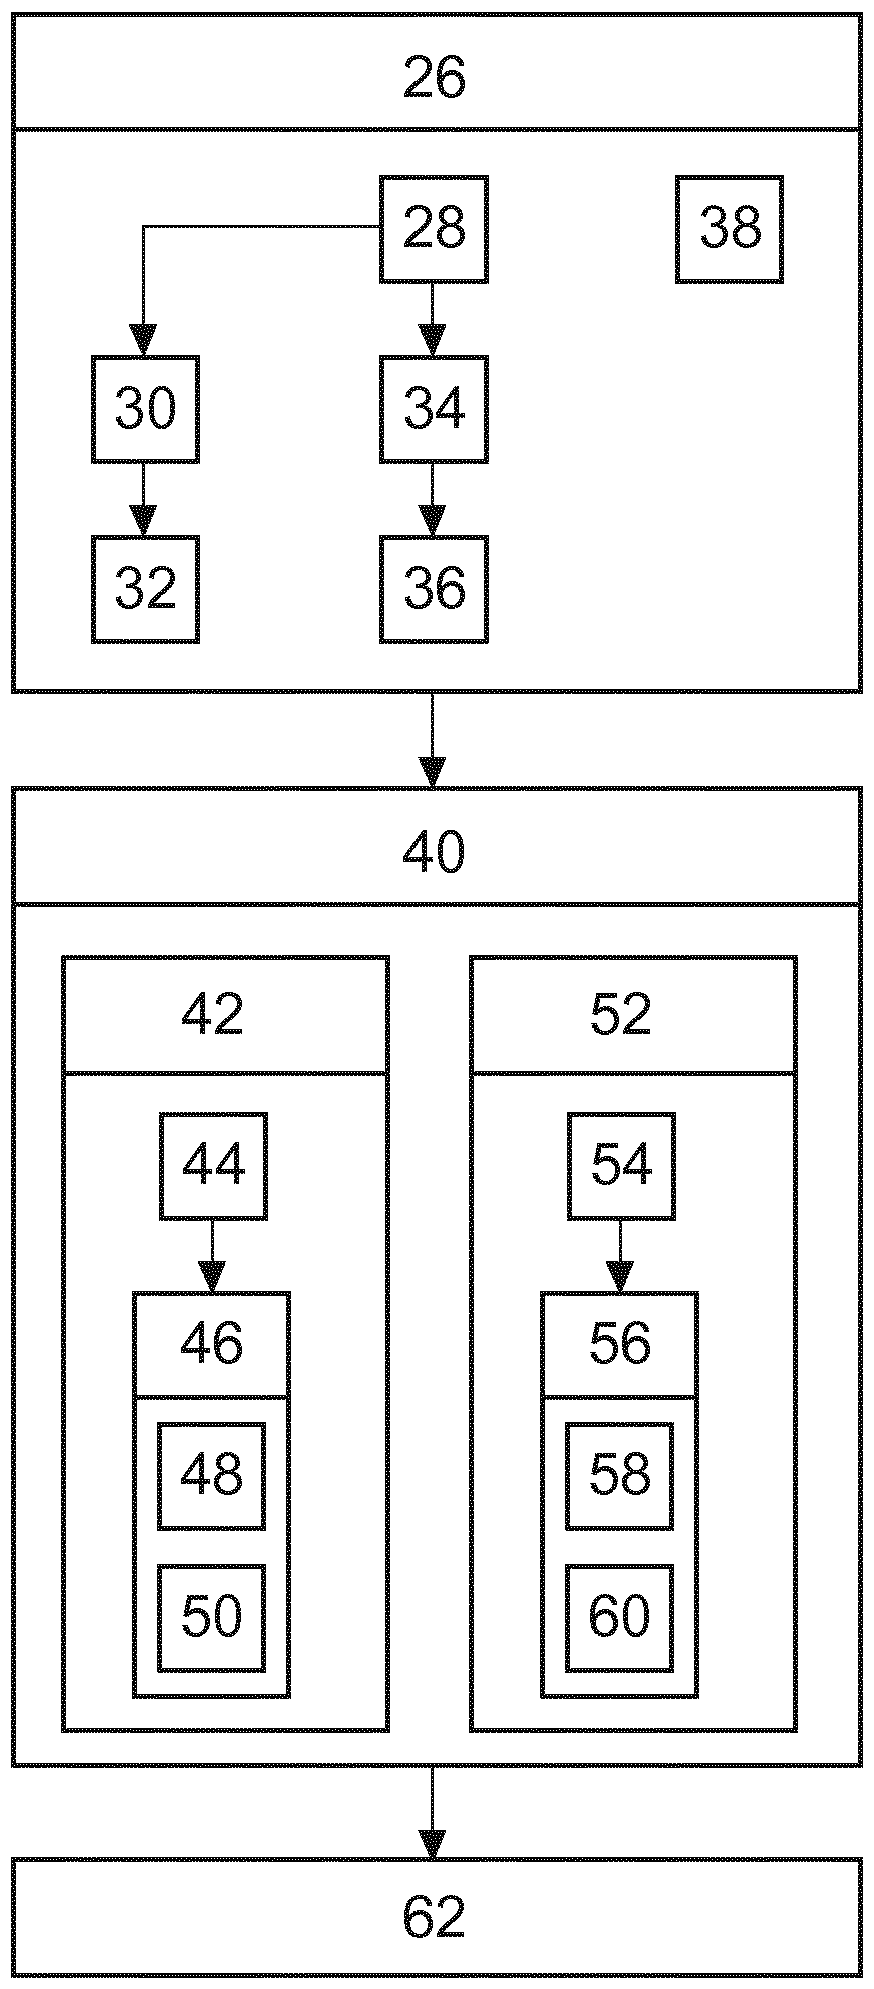 Method for reproducing a map display in a vehicle depending on a driving situation